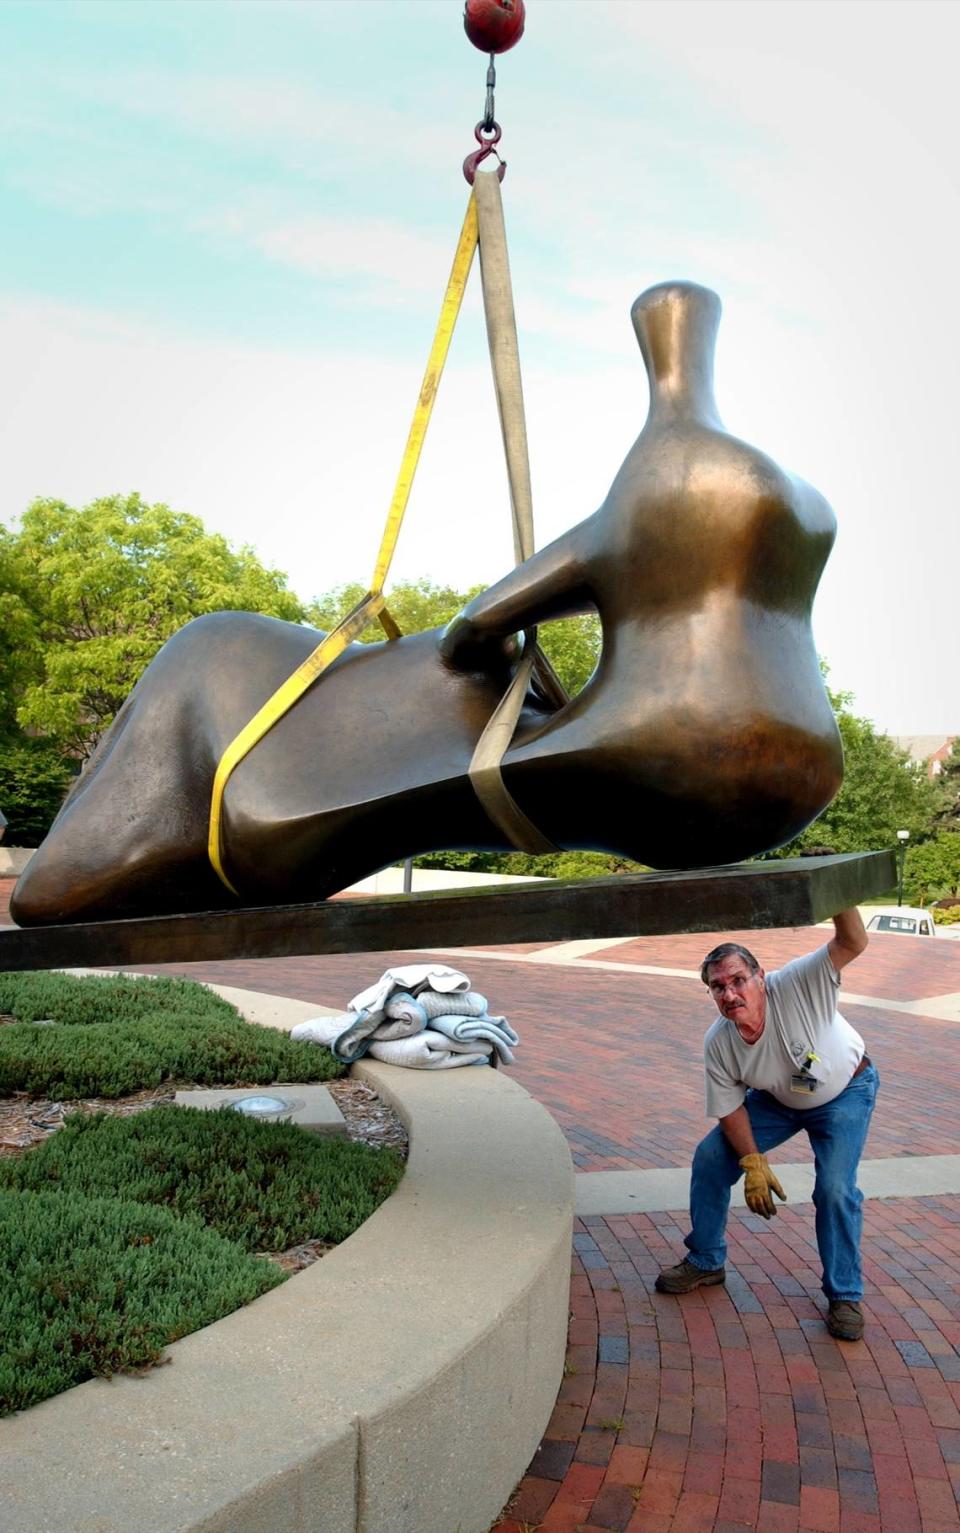 Henry Moore’s “Reclining Figure: Hand” as it was installed outside the Ablah Library at Wichita State University in 2005. File photo